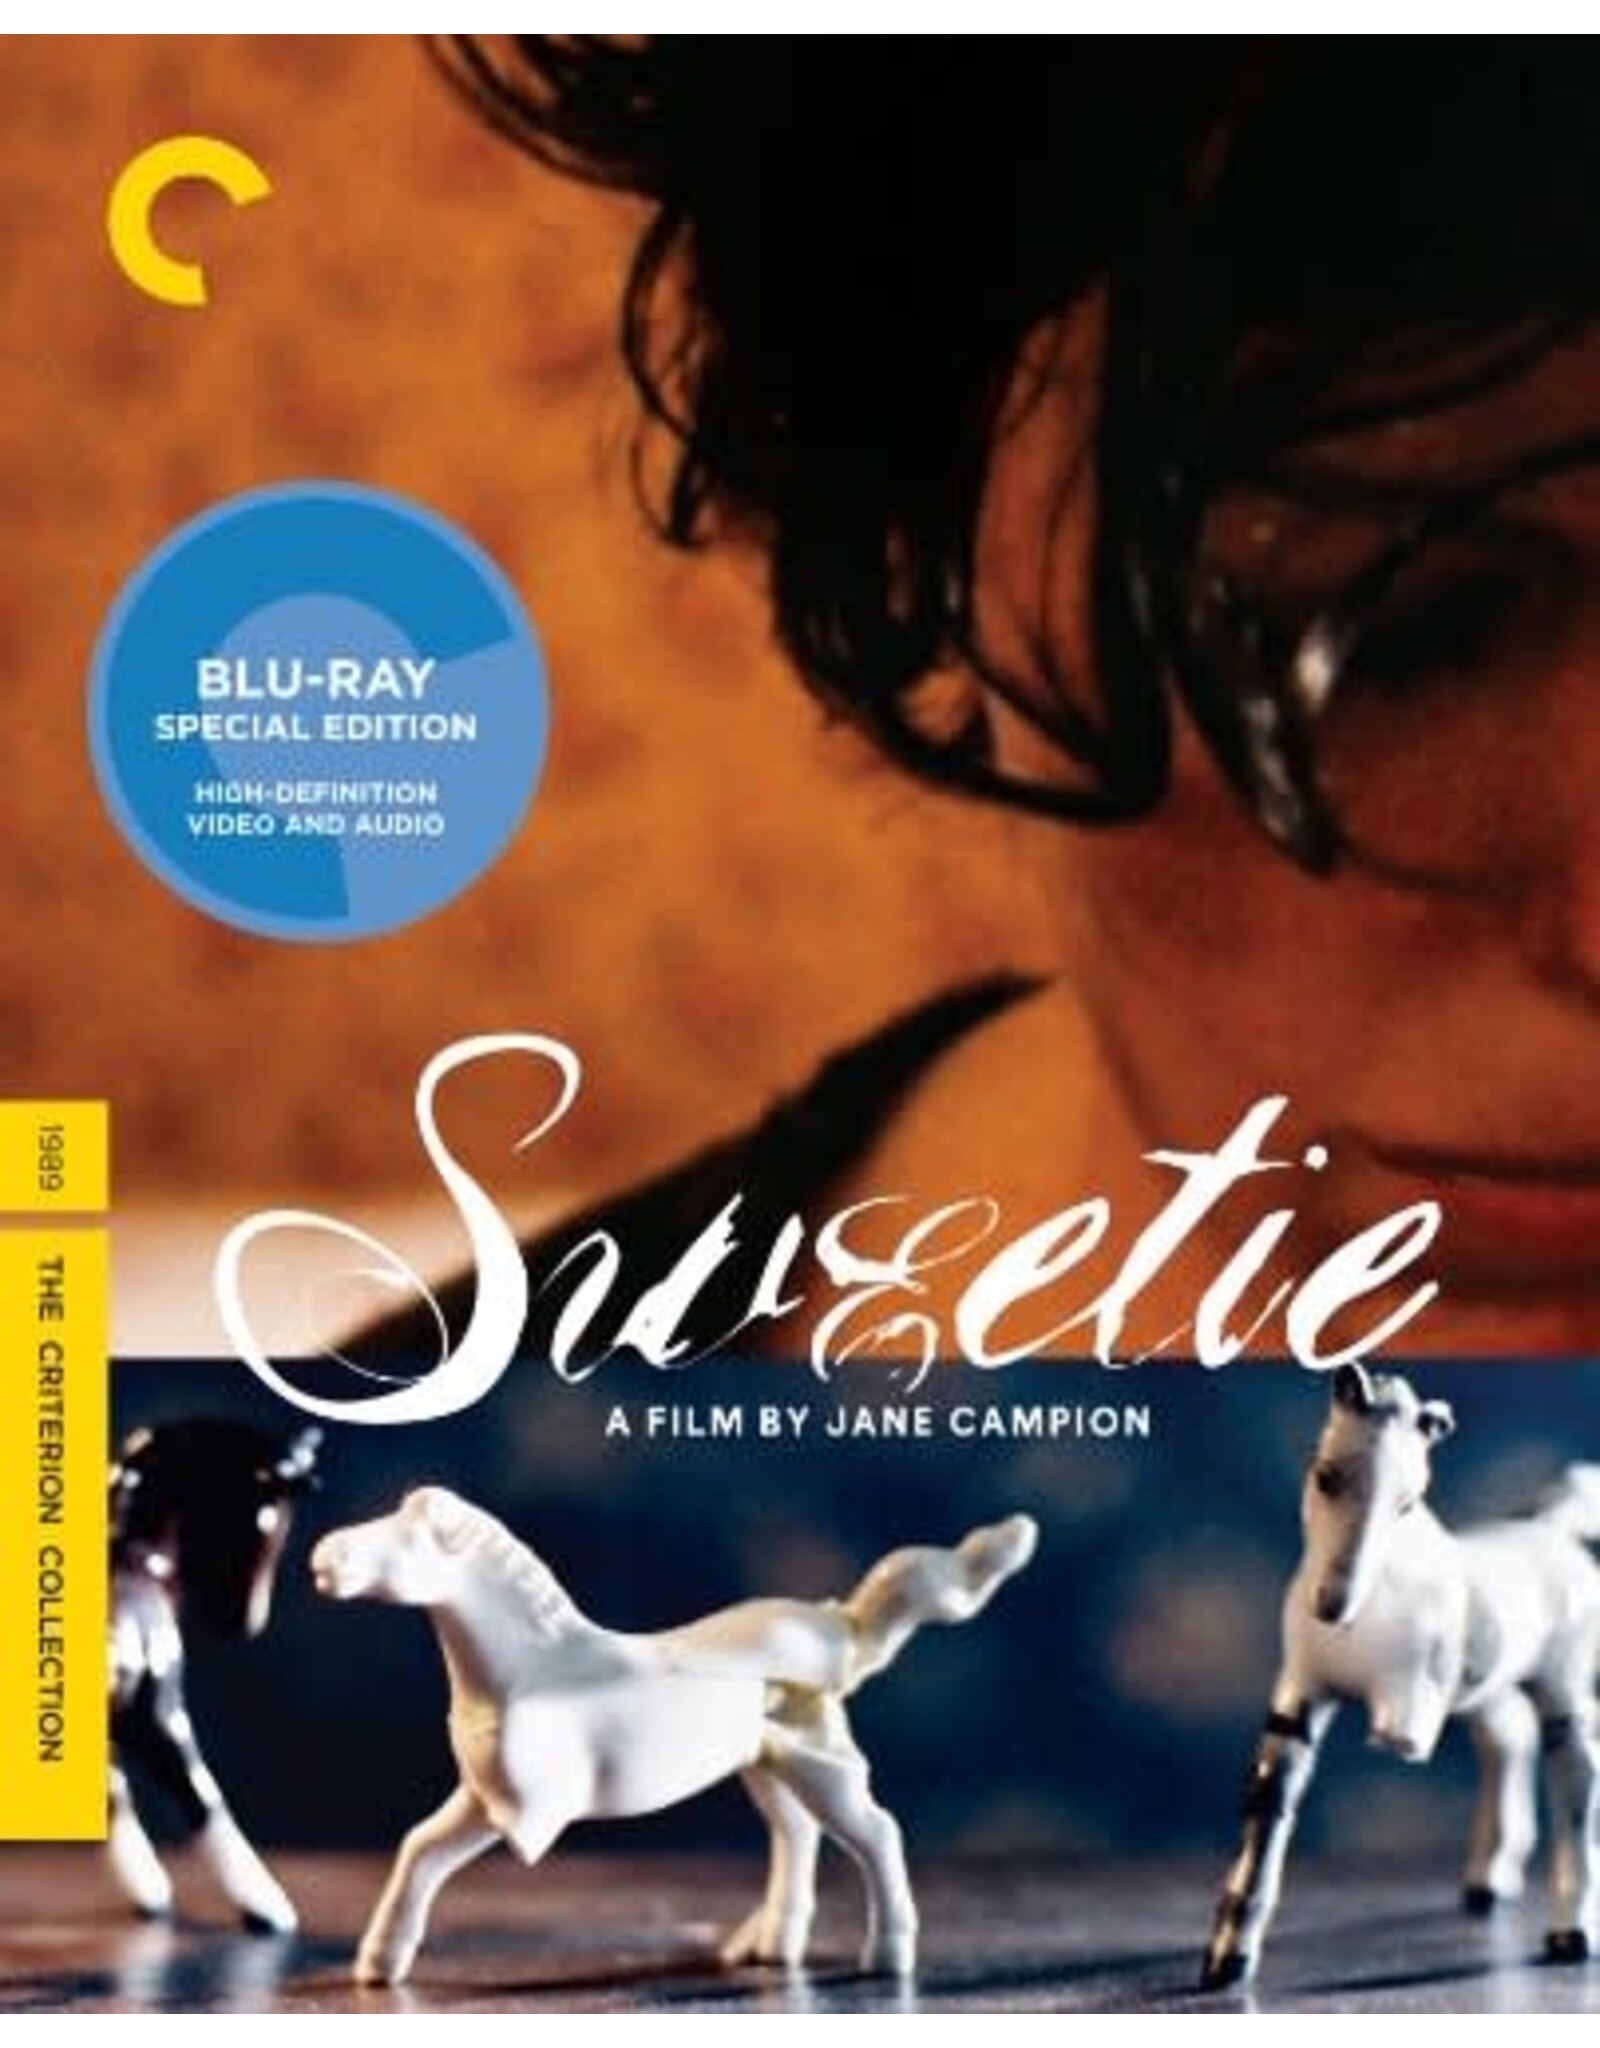 Criterion Collection Sweetie - Criterion Collection (Brand New)